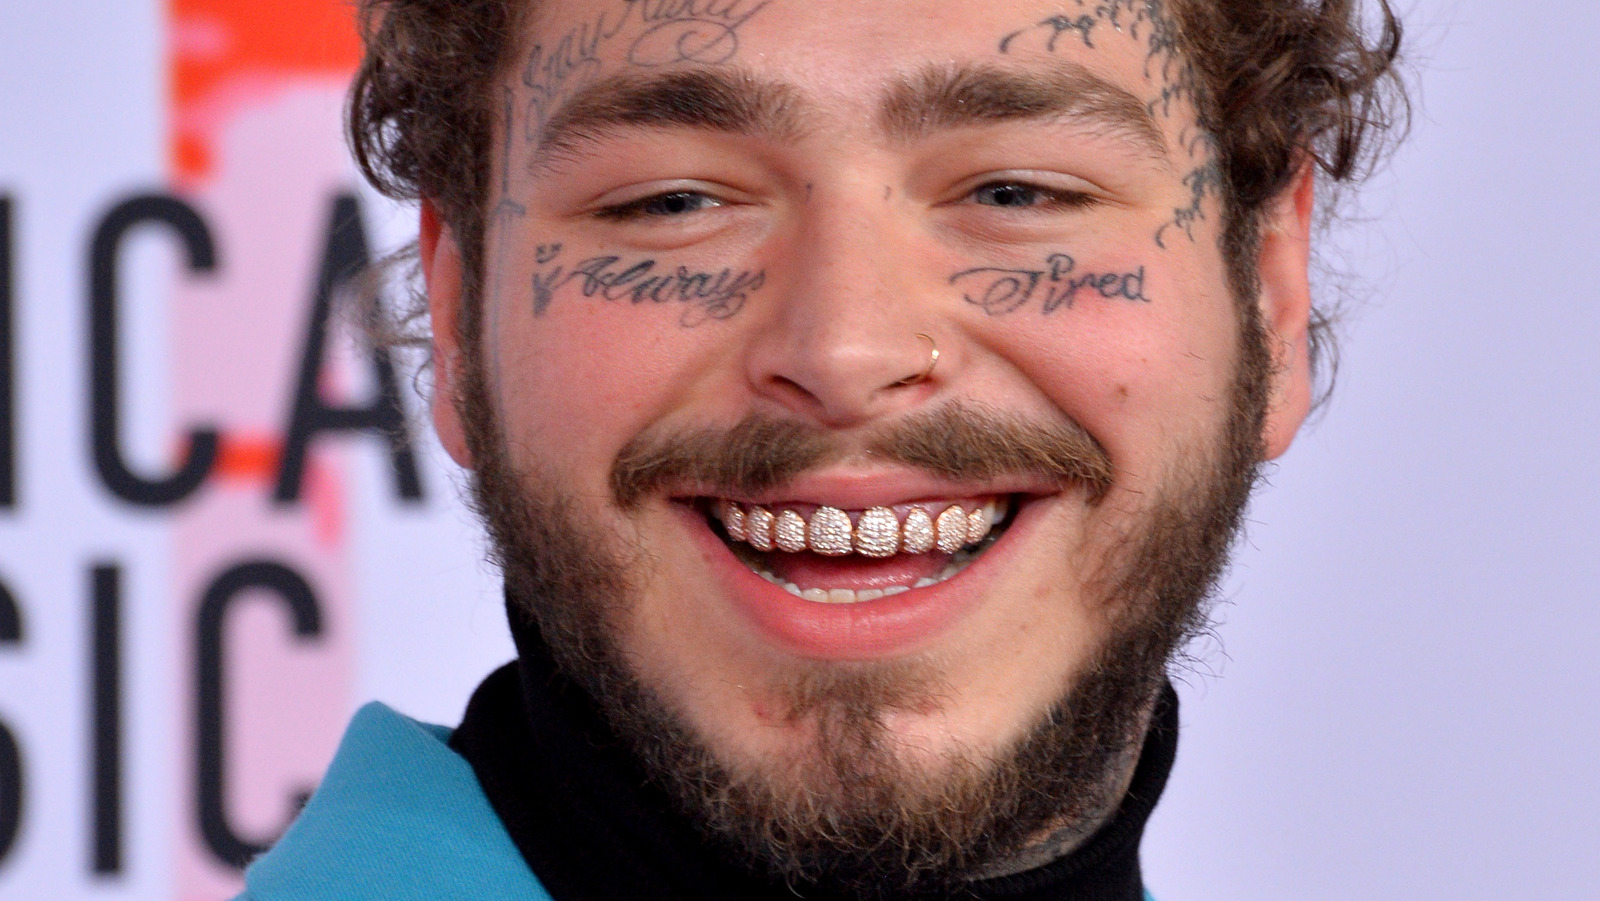 Post Malone Net Worth: How Much Is The Famous Rapper Worth?